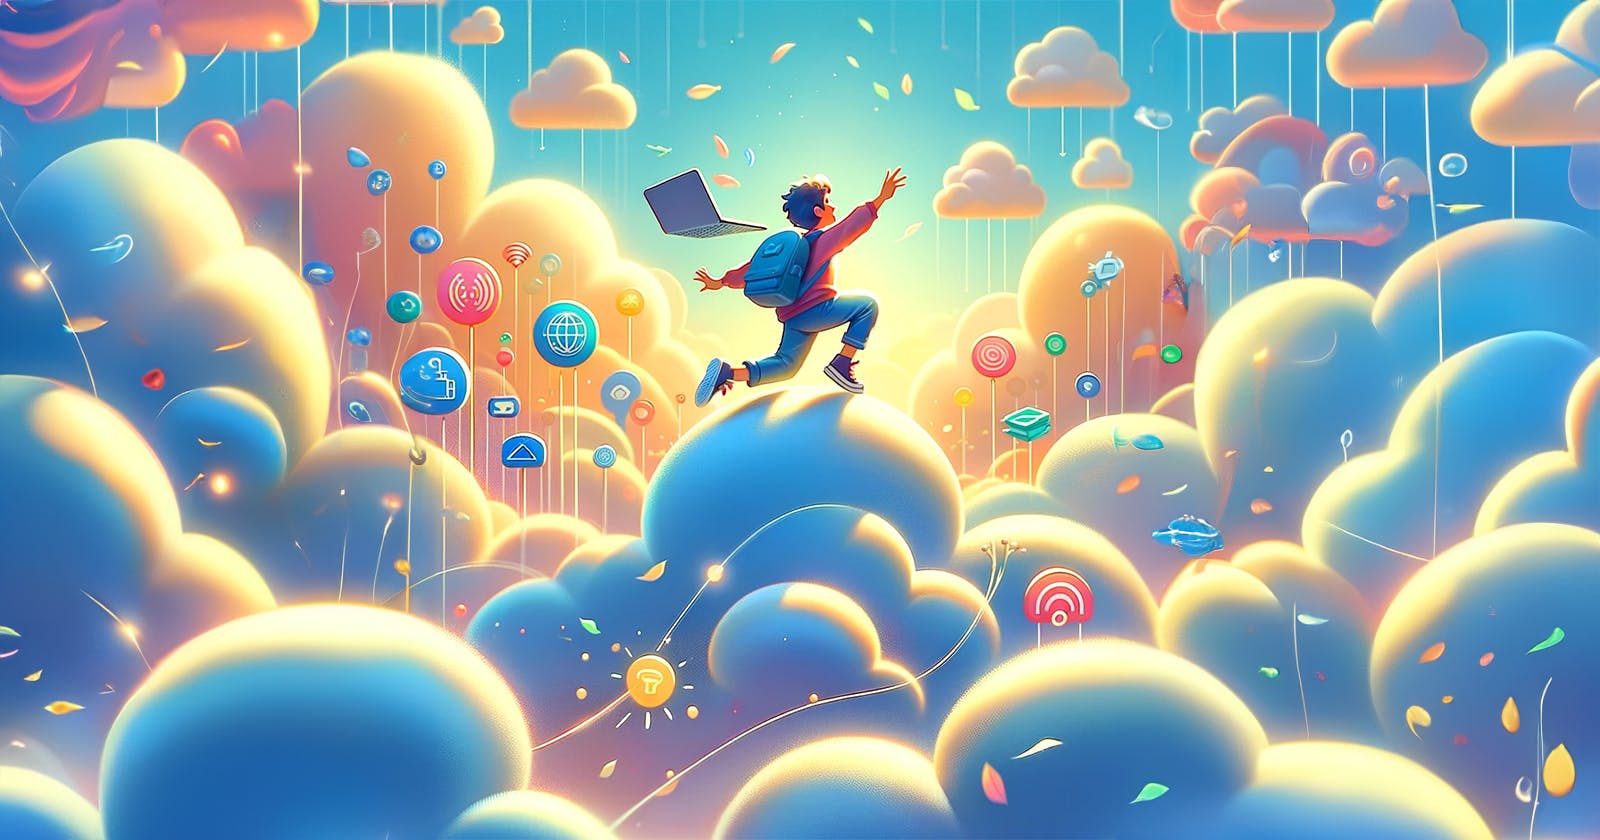 ☁️ Head into the Clouds! 7 Free Resources to Learn Cloud Computing